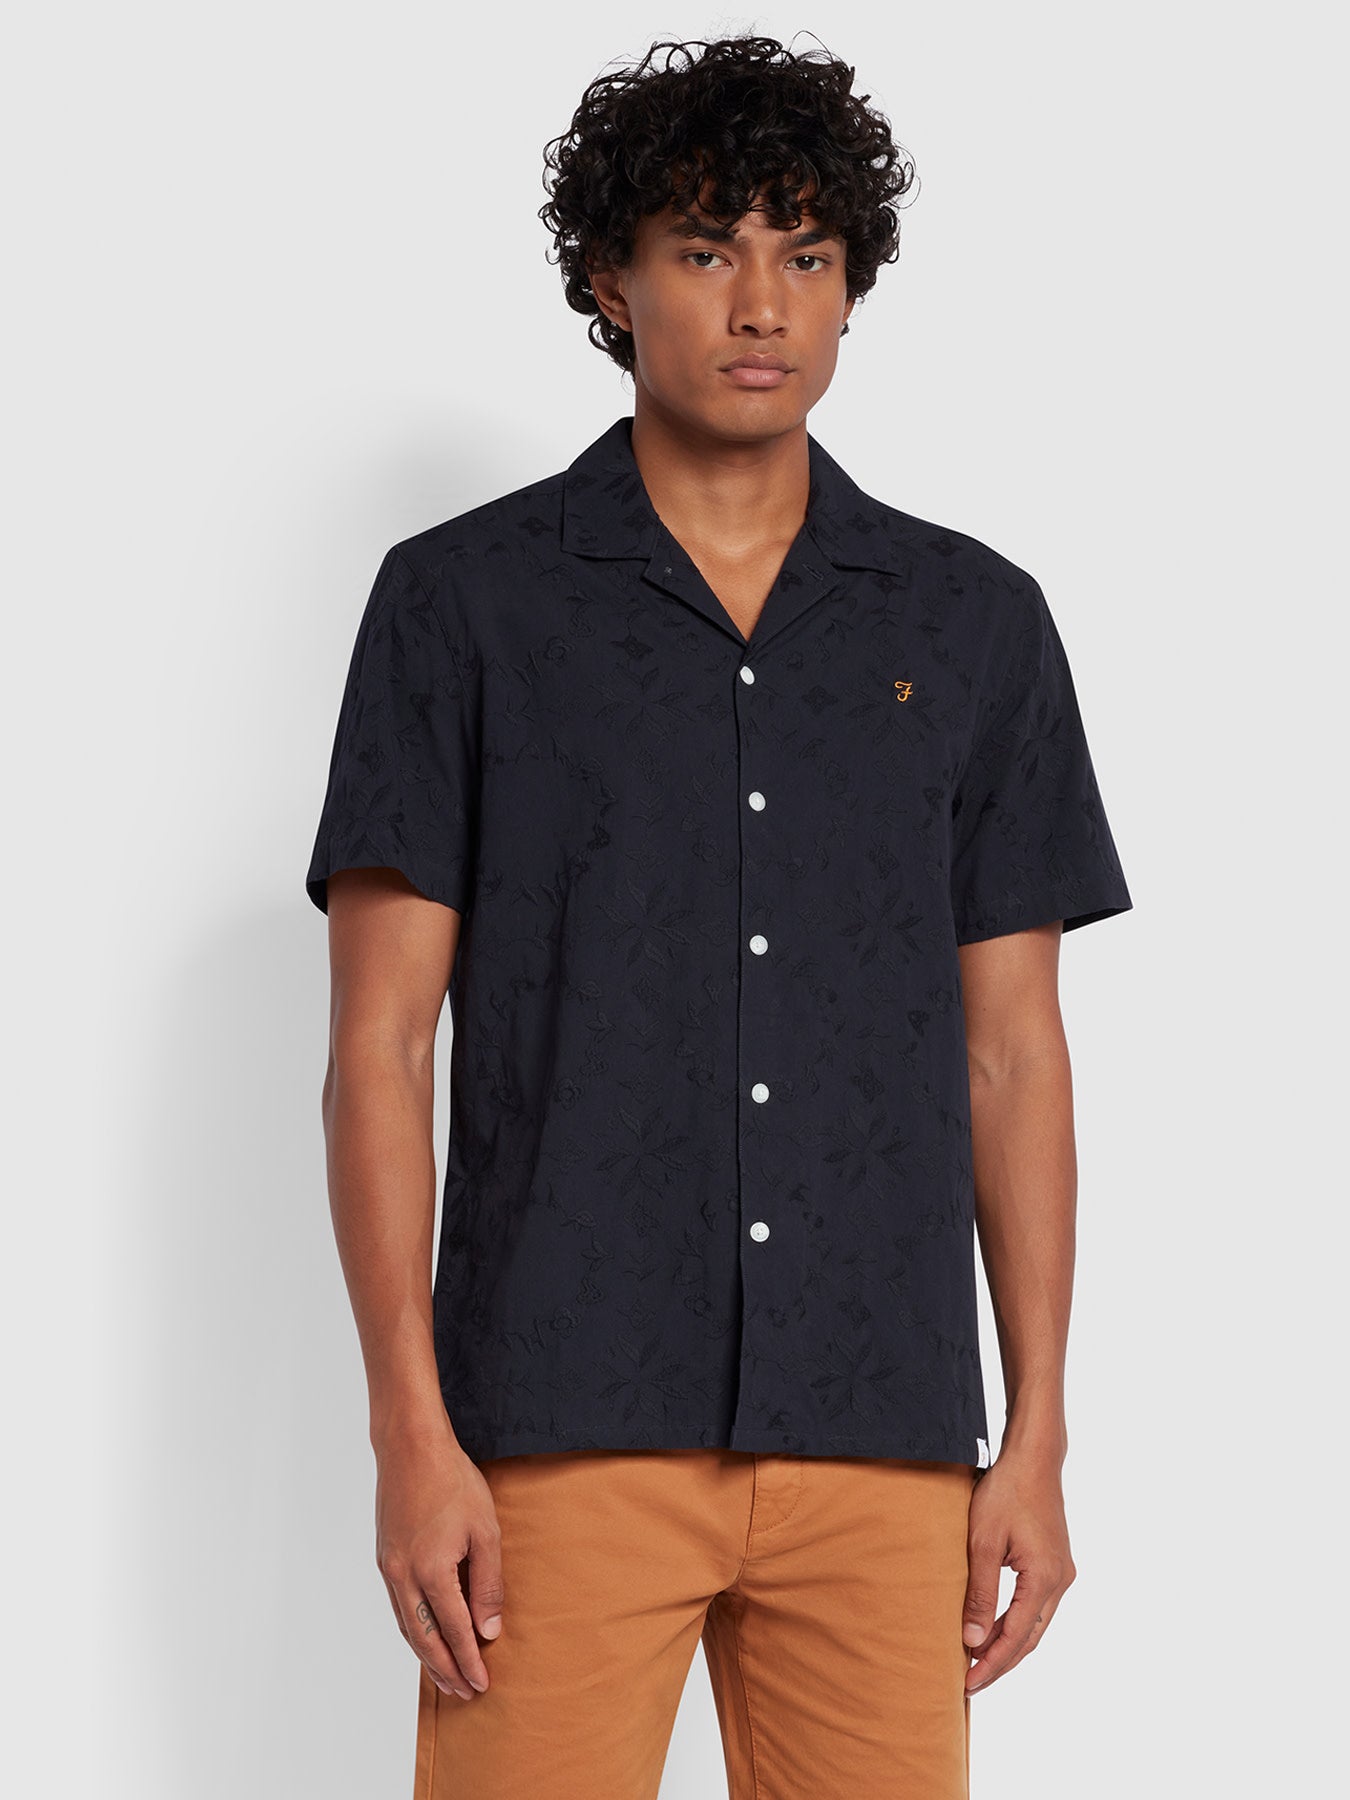 View Loma Casual Fit Revere Embroidery Shirt In True Navy information